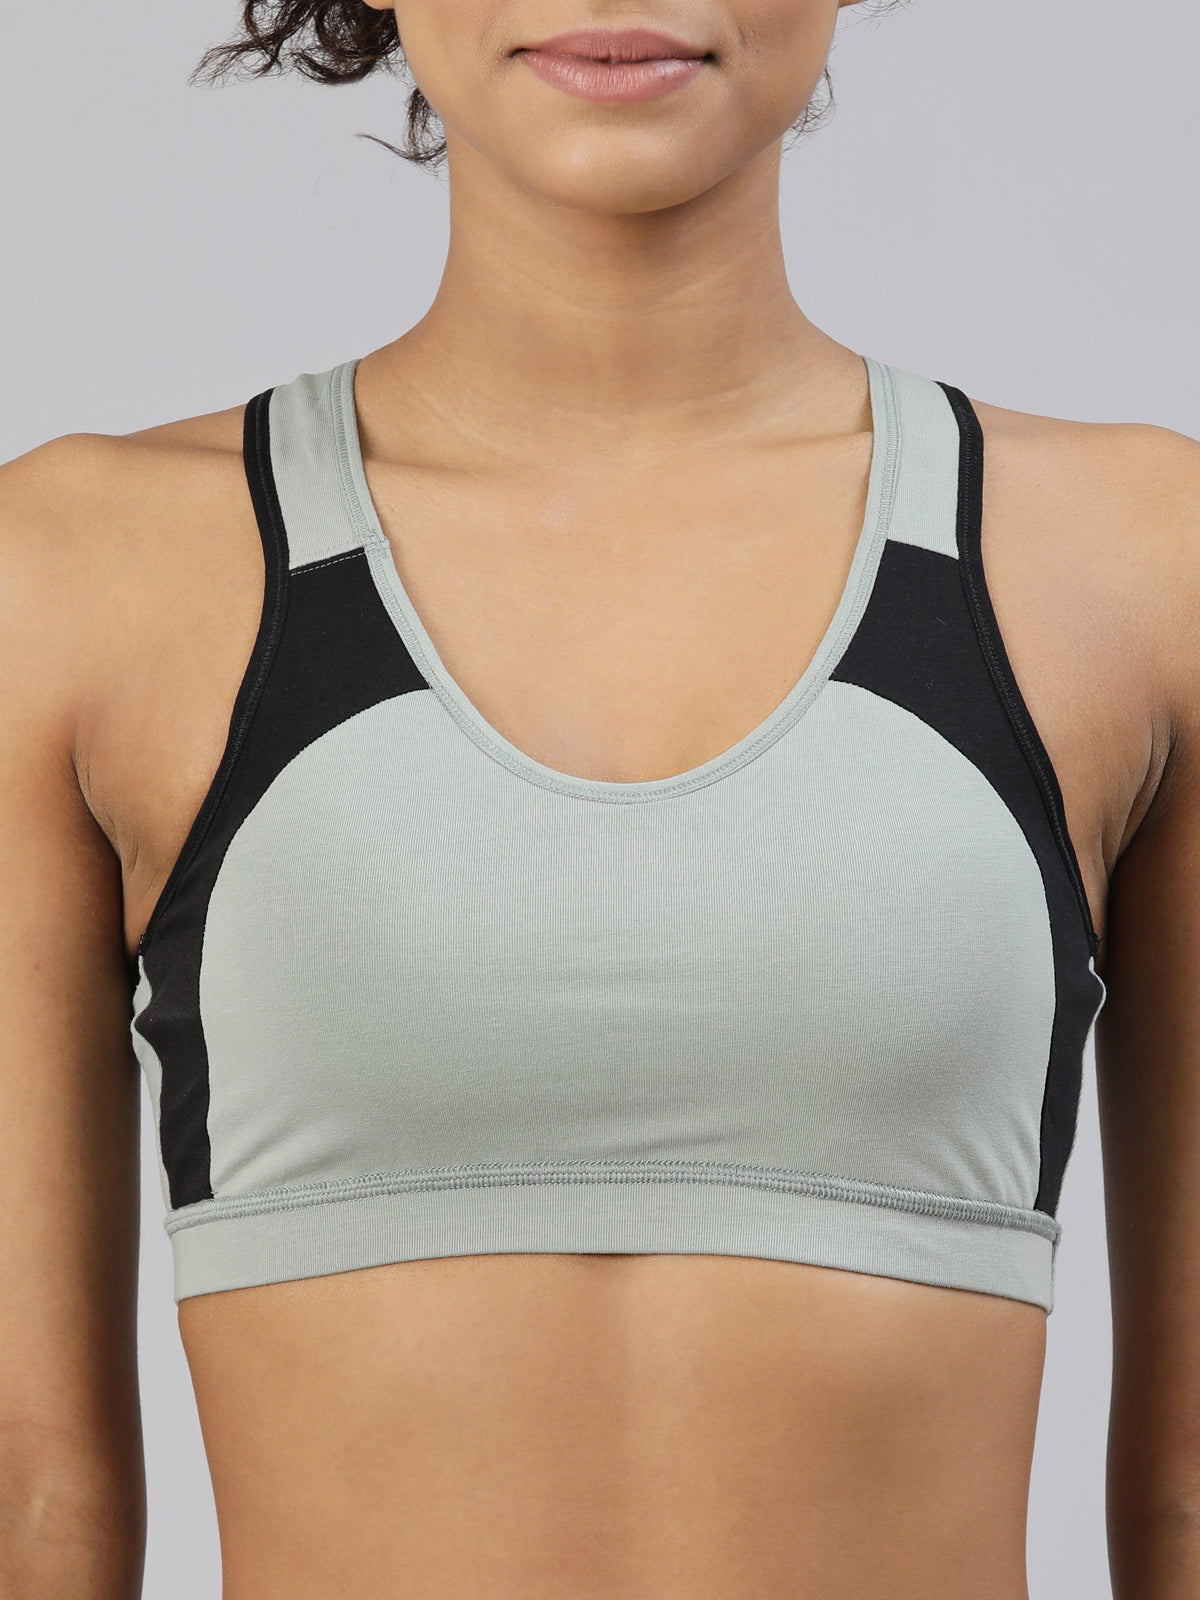 blossom-workout bra-iceberg green2-Sports collection-utility based bra